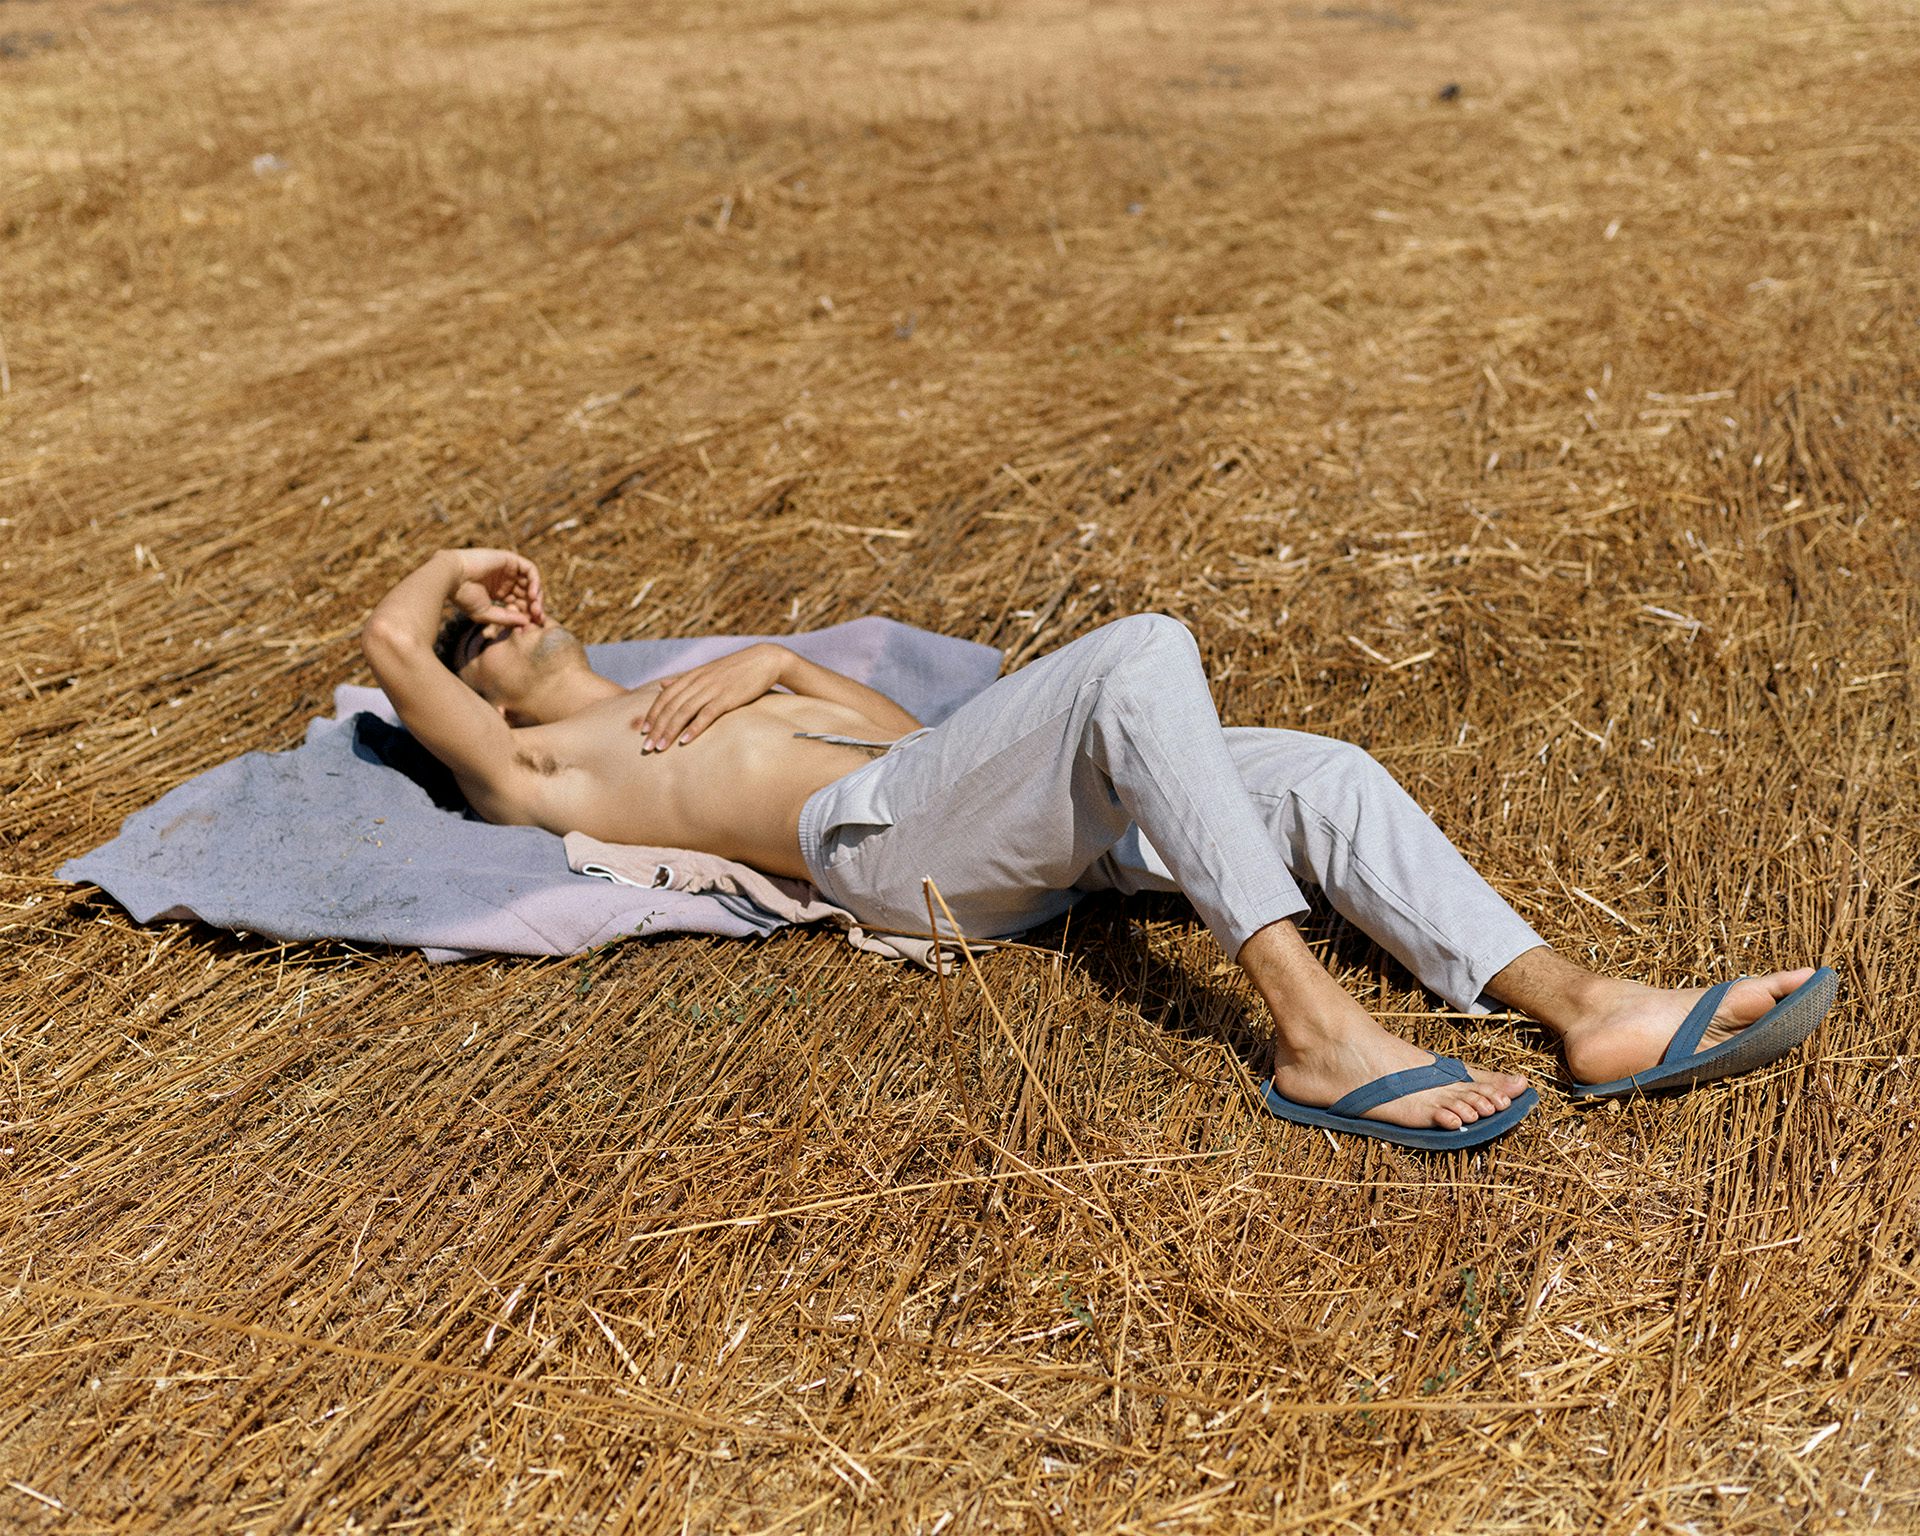 Photograph of a person wearing grey tracksuit bottoms and flip flops lying down on a brown dry surface, holding their arm to shield their face, taken from Dialect by Felipe Romero Beltran